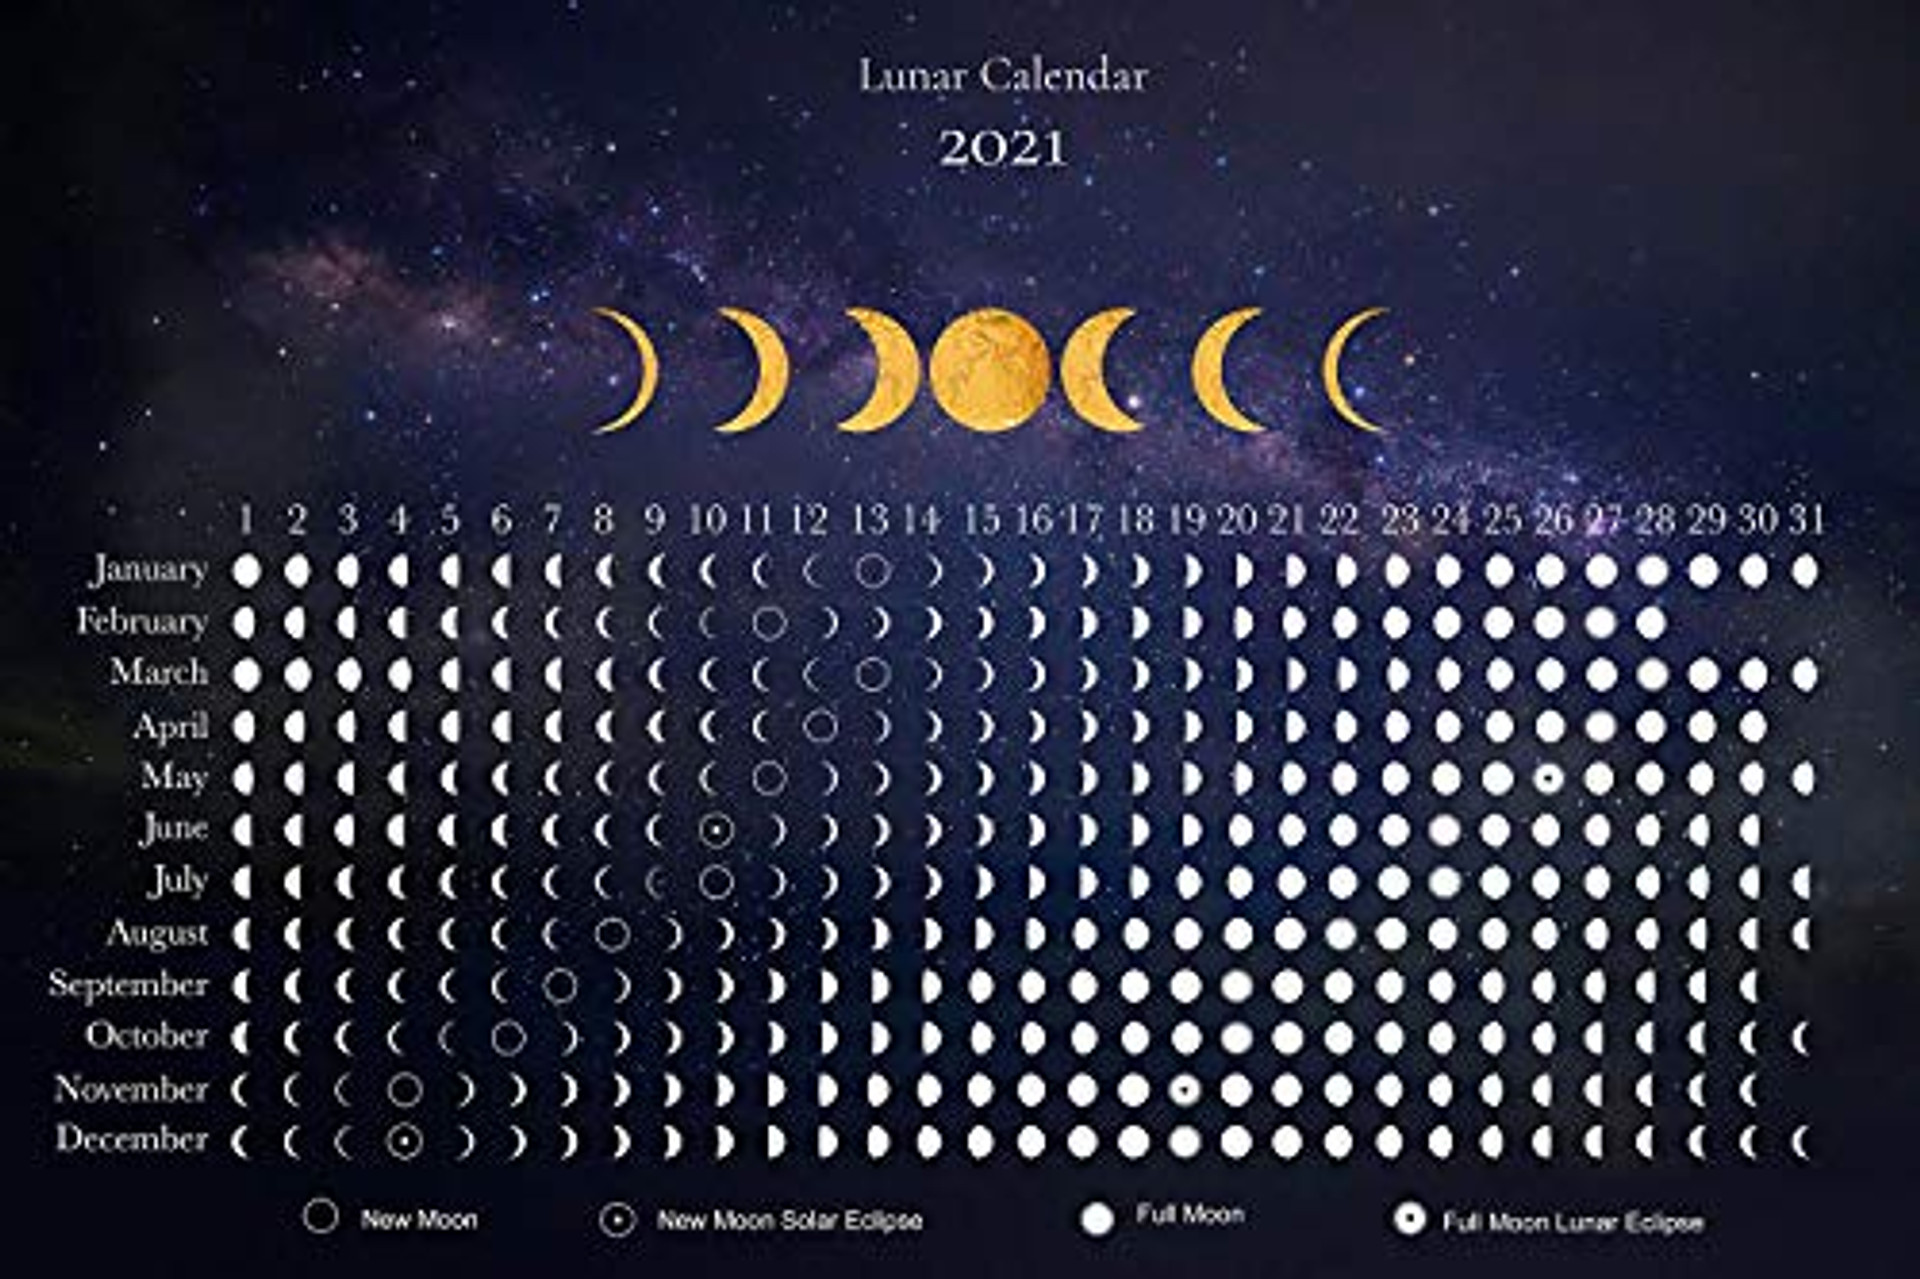 Moon Calendar 2021 Lunar Phases and Eclipses Night Sky Horizontal